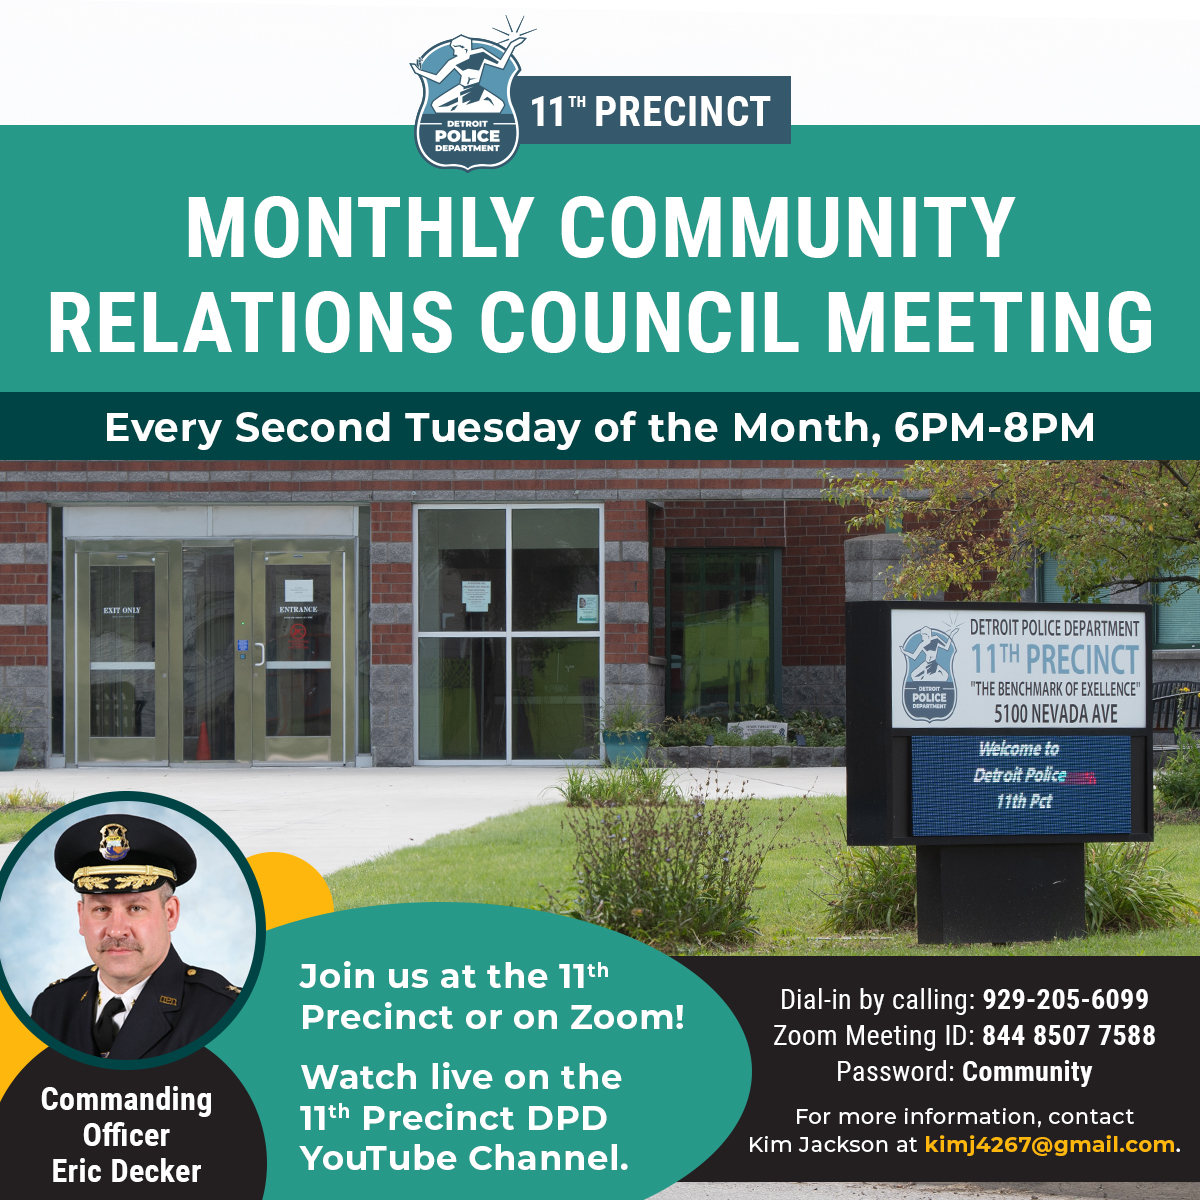 11th Precinct Community Members: DPD 11th Precinct Police/Community Relations Council meetings resume tonight! Join us online or in person. Every 2nd Tuesday, 6PM - 8PM, at 5100 E. Nevada or via Zoom: bit.ly/11thPctCommuni… Meeting ID: 844 8507 7588, Passcode: Community.